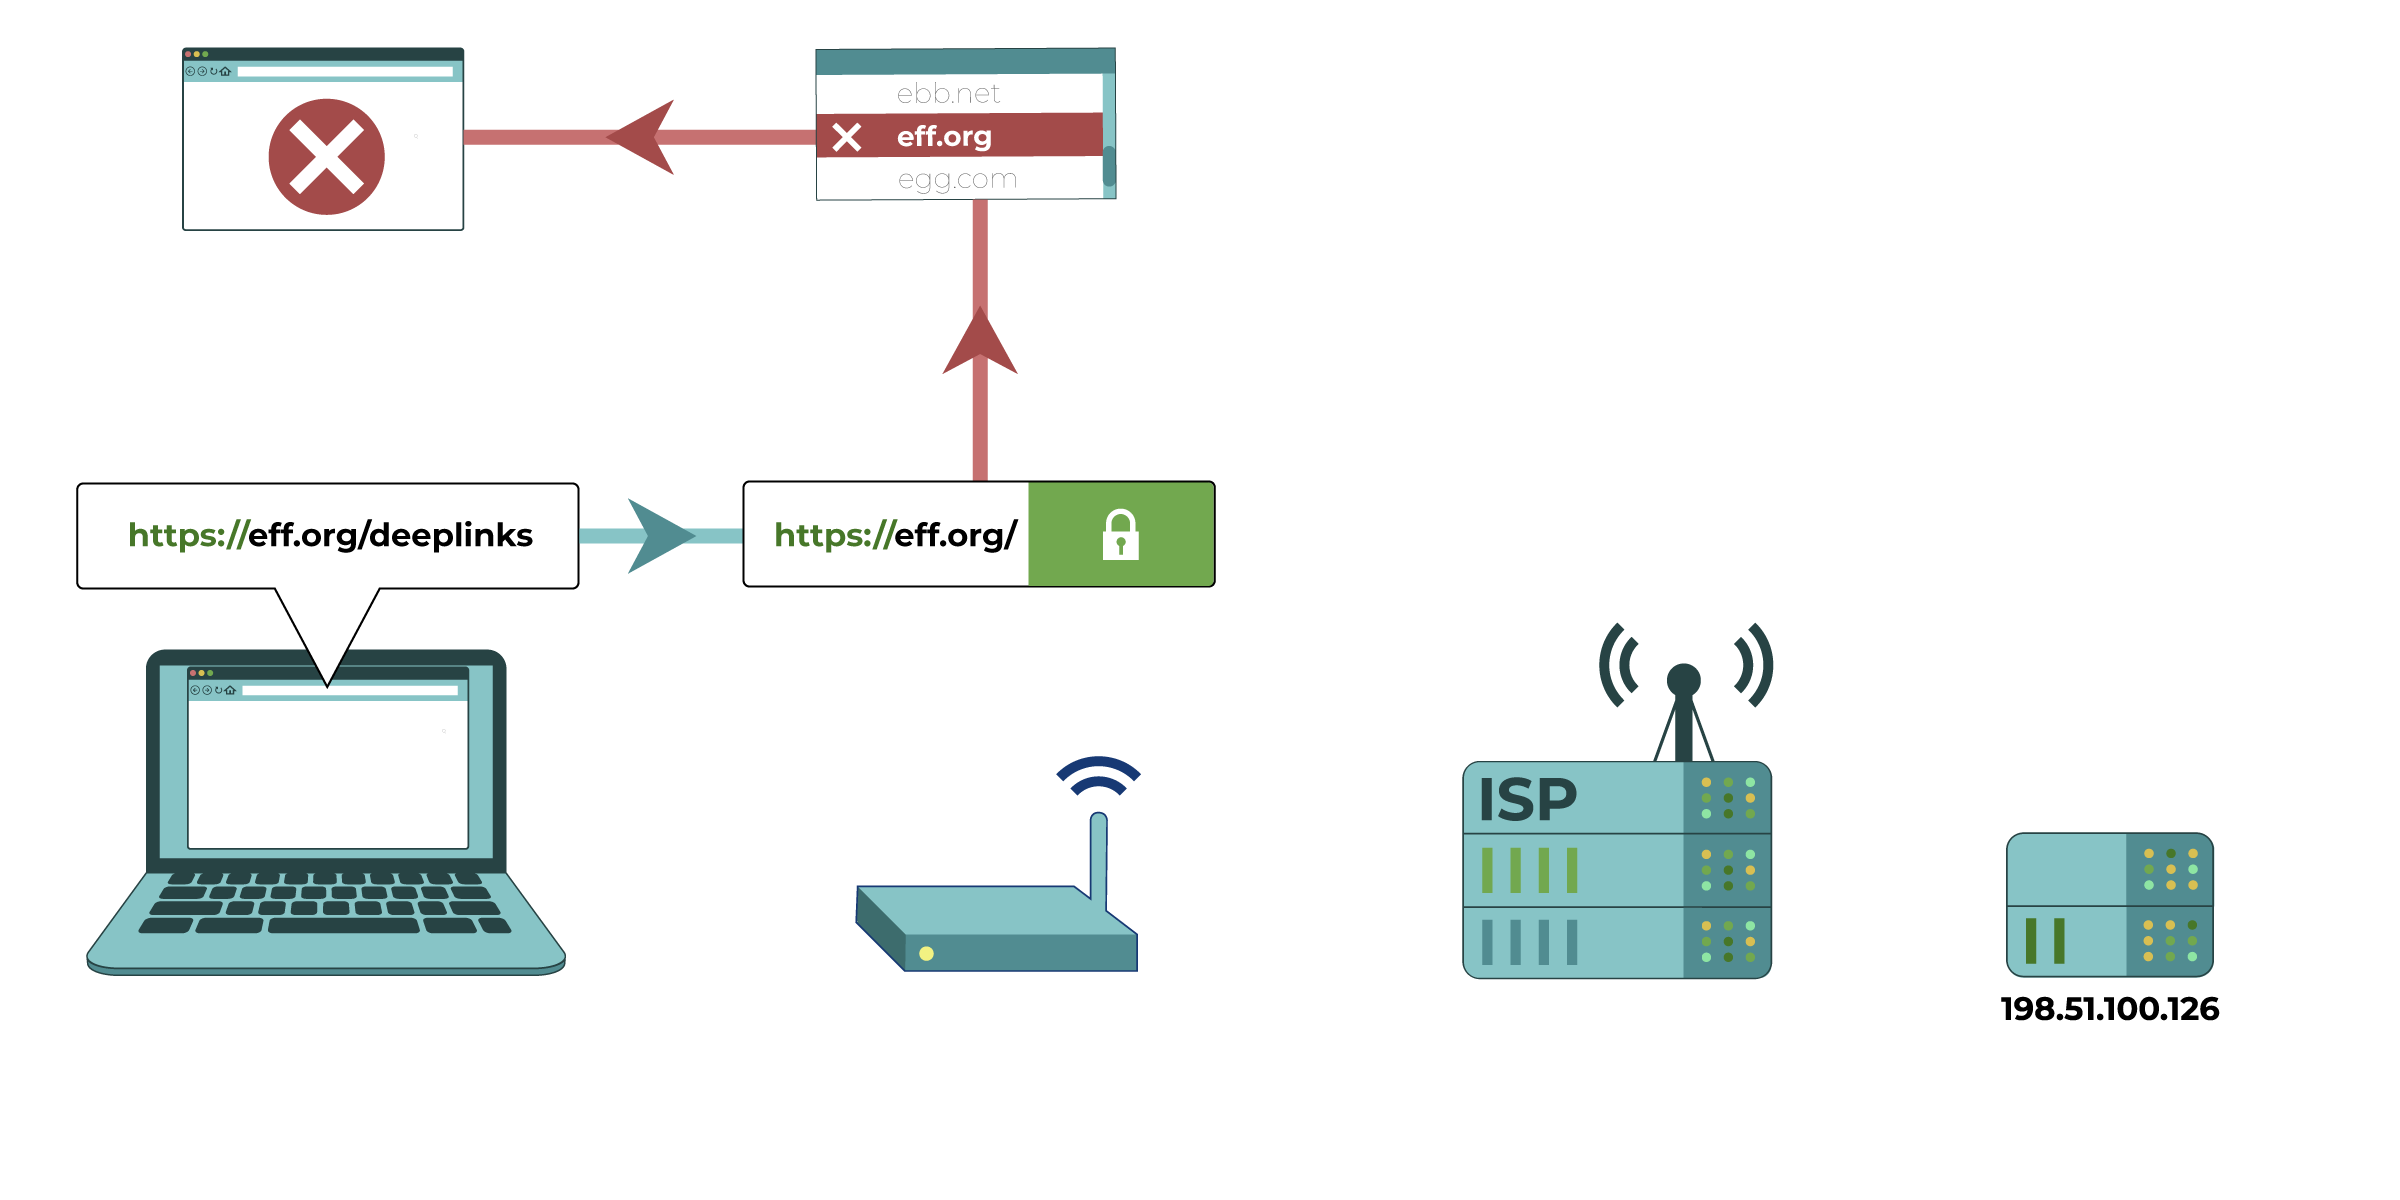 In this diagram, a computer attempts to access eff.org/deeplinks. The network administrator (represented by a router) is able to see domain (eff.org) but not the full website address after the slash. The network administrator can decide which domains to block access to.